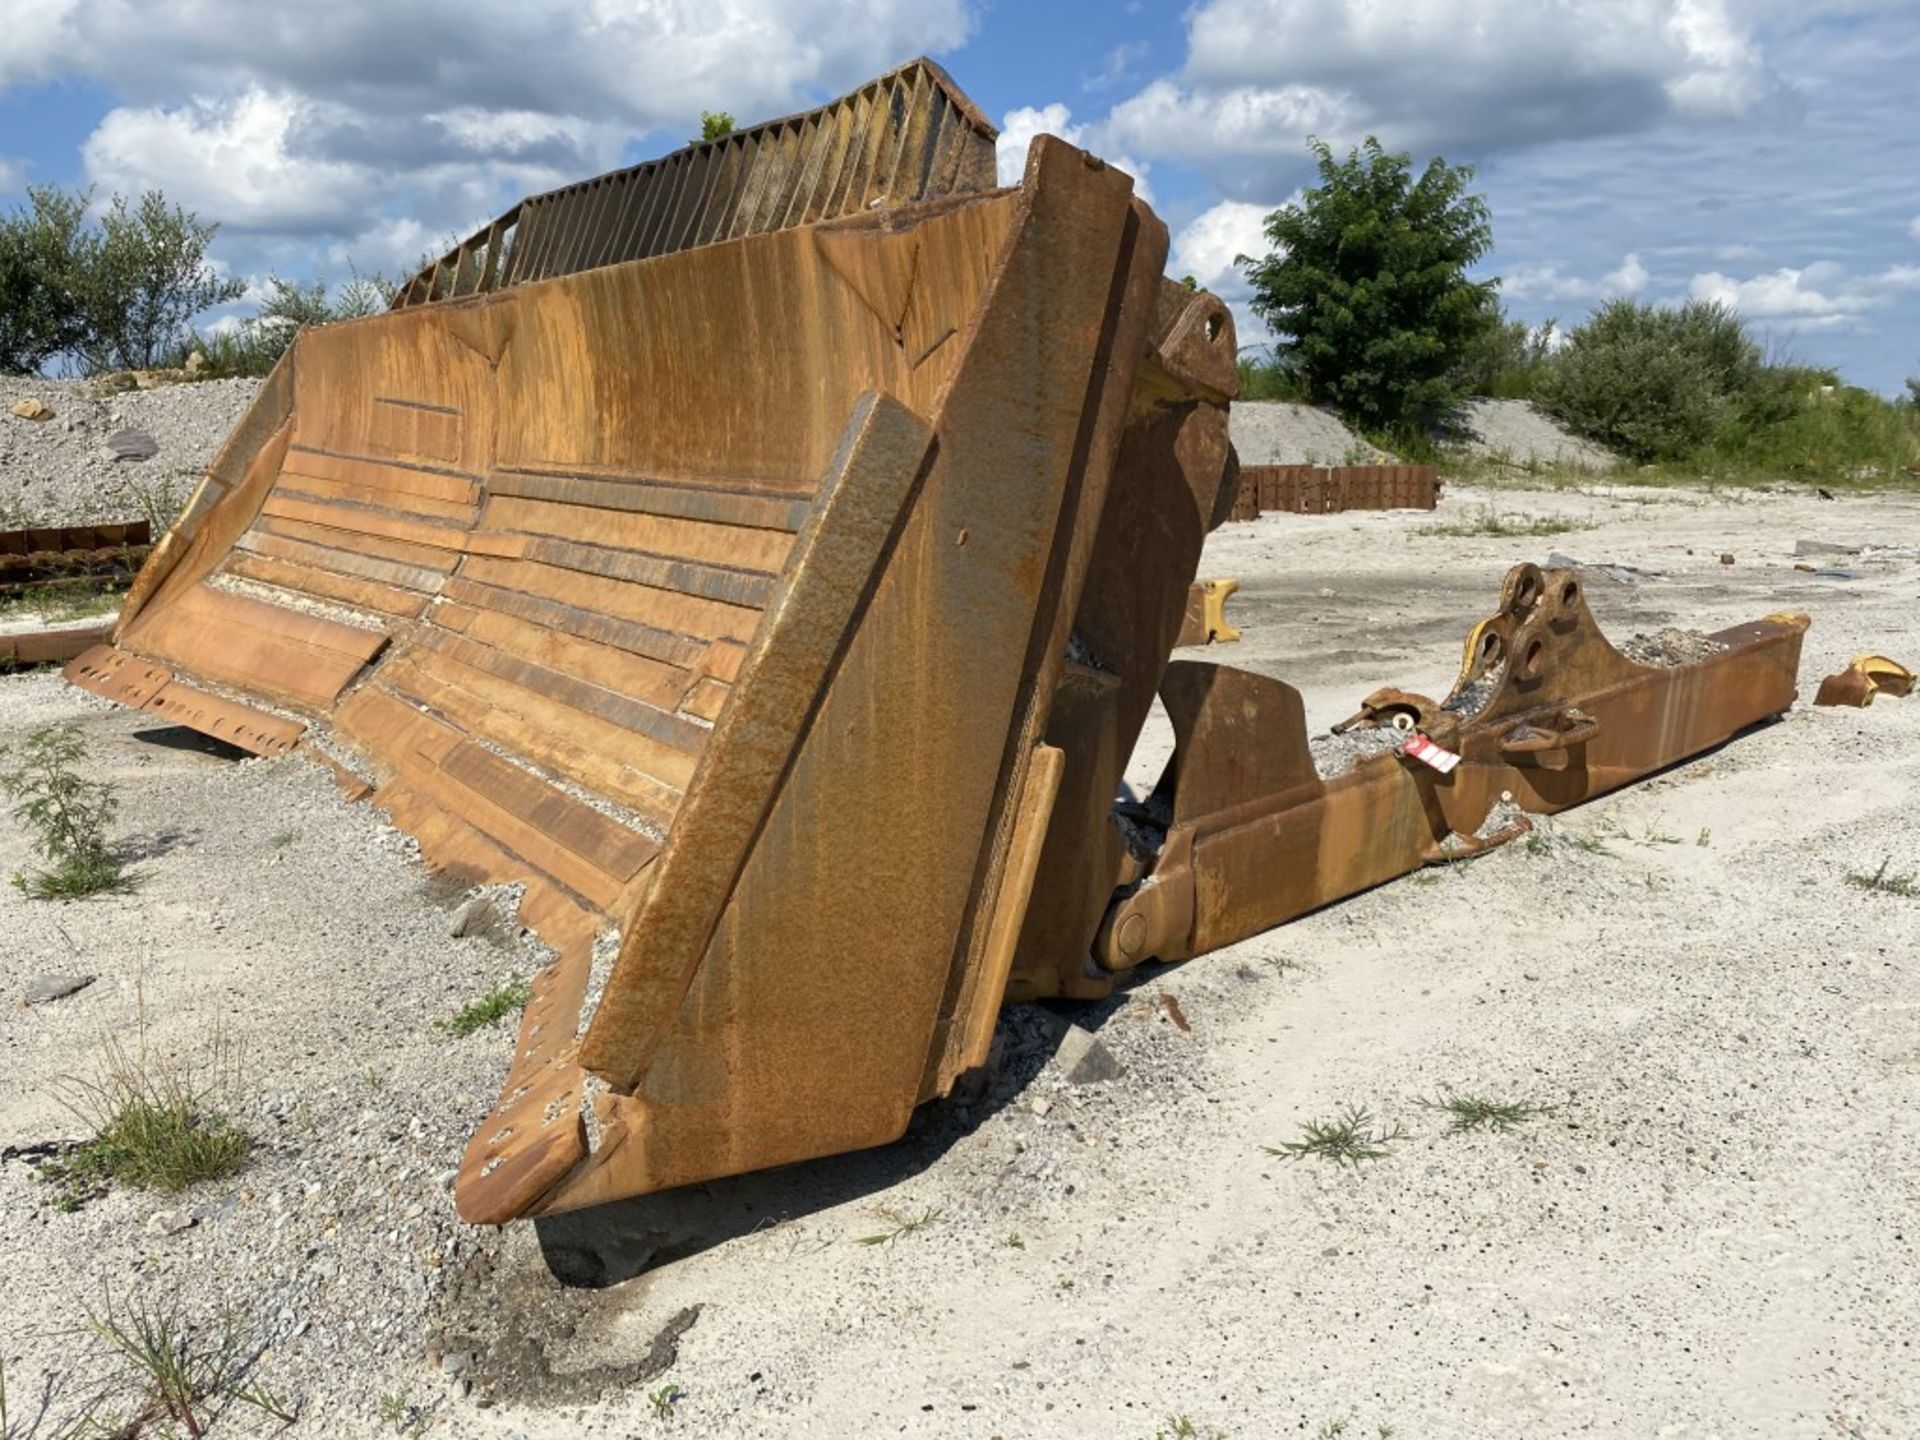 CATERPILLAR DOZER BLADE WITH SIDE BRACKETS, 20'6'' WIDE, COMES WITH (2) USED TRACK SECTIONS AND A